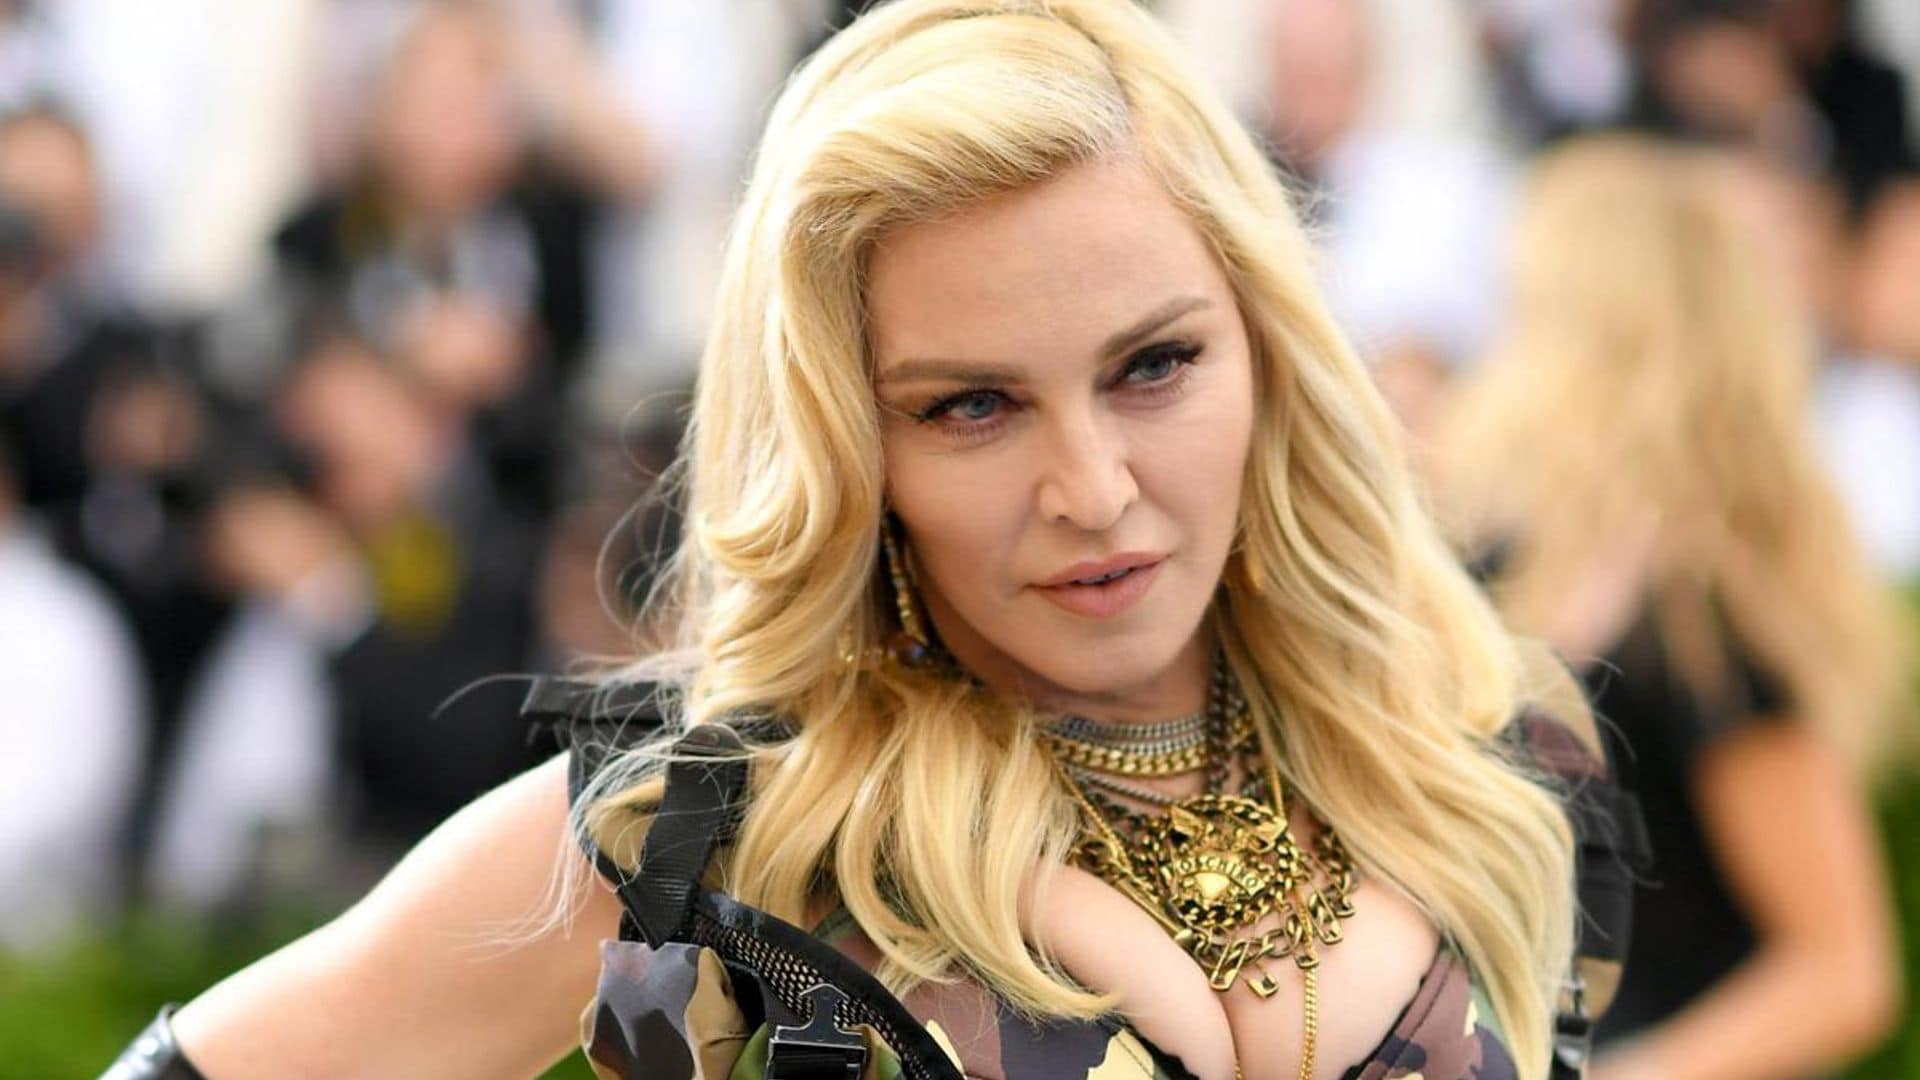 Madonna opens up about previous marriages, says she regrets ‘both times’